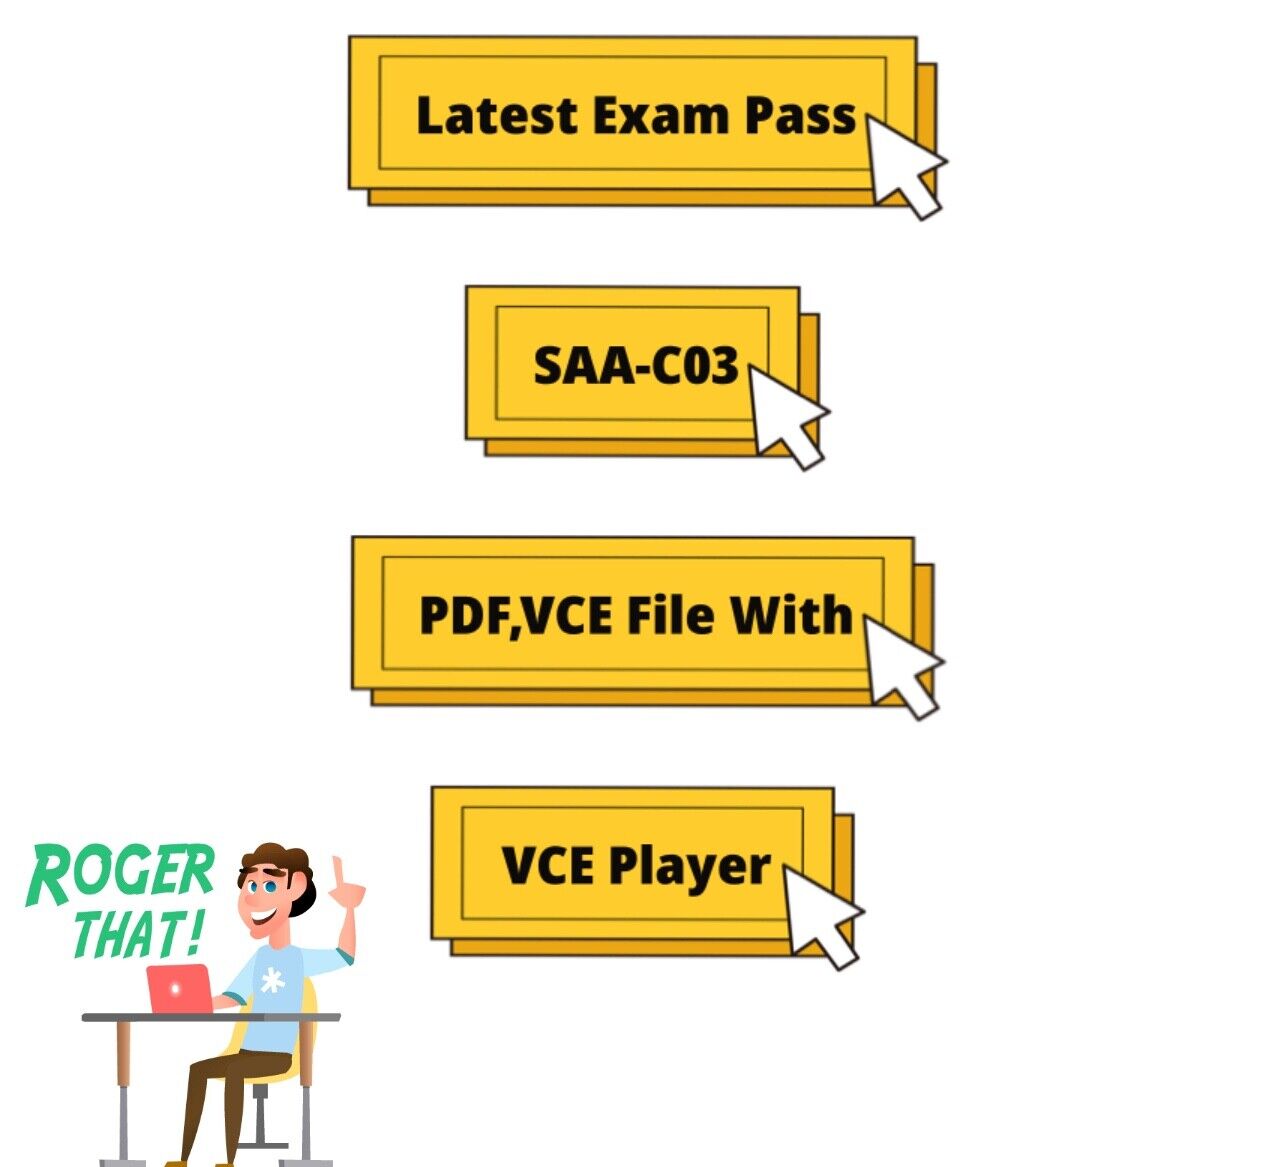 SAA-C03 Exam AWS Certified Solutions Architect PDF,VCE JANUARY  630 Questions